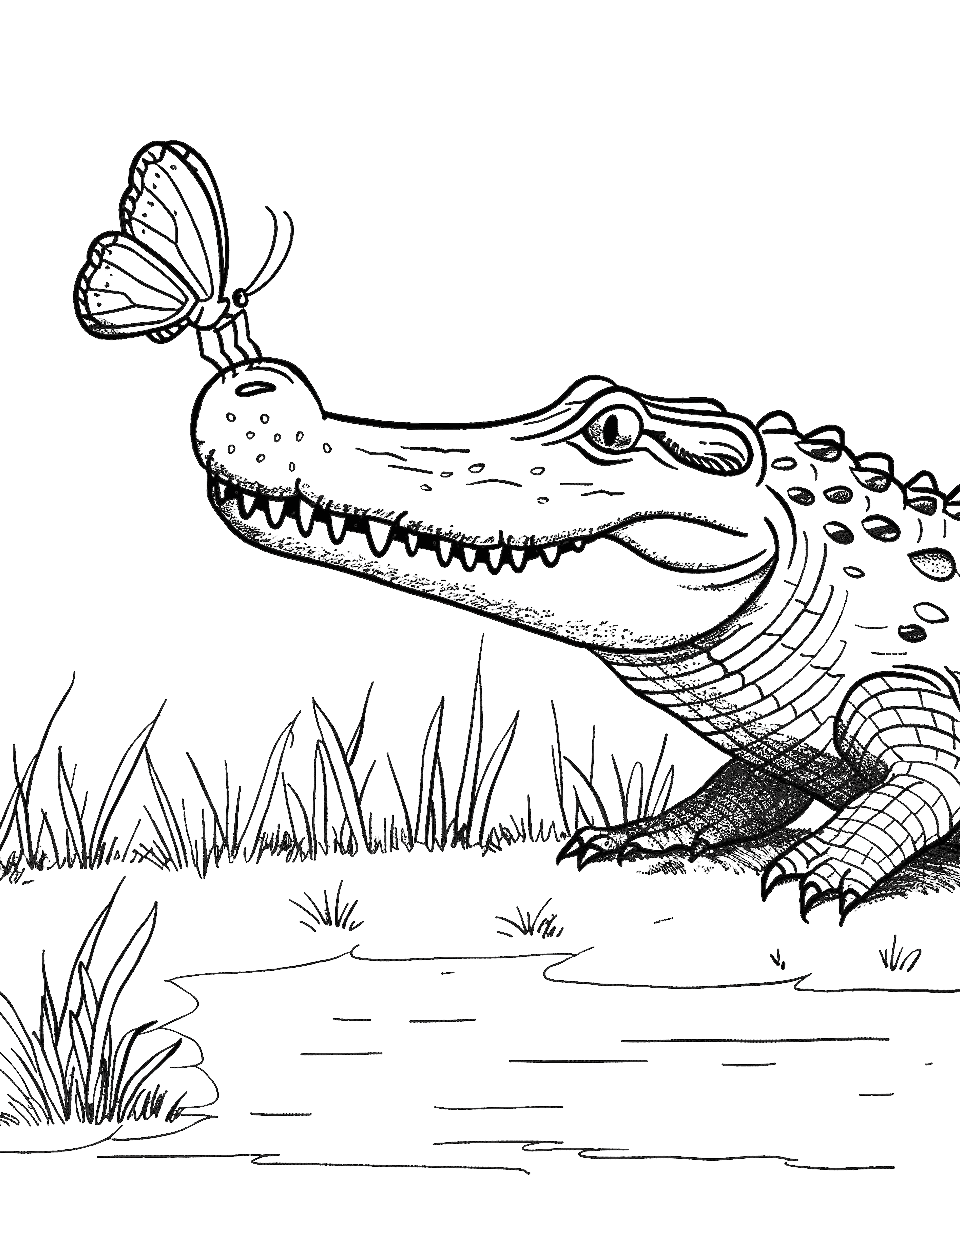 Crocodile and the Butterfly Coloring Page - A curious crocodile looking at a butterfly perched on its nose.